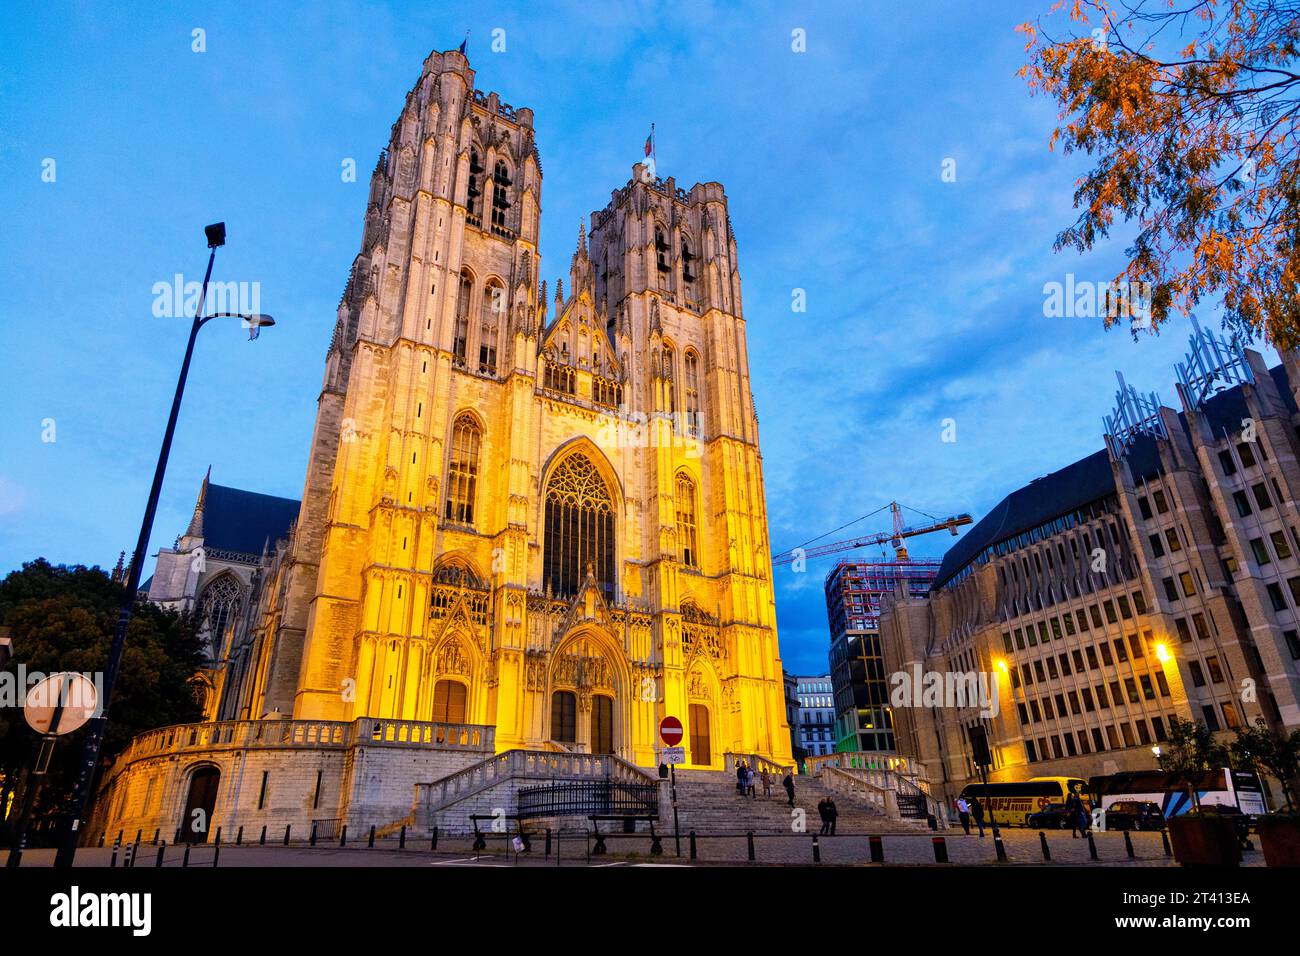 Exterior of the Brabantine Gothic style Cathedral of St. Gudula at night, Brussels, Belgium Stock Photo